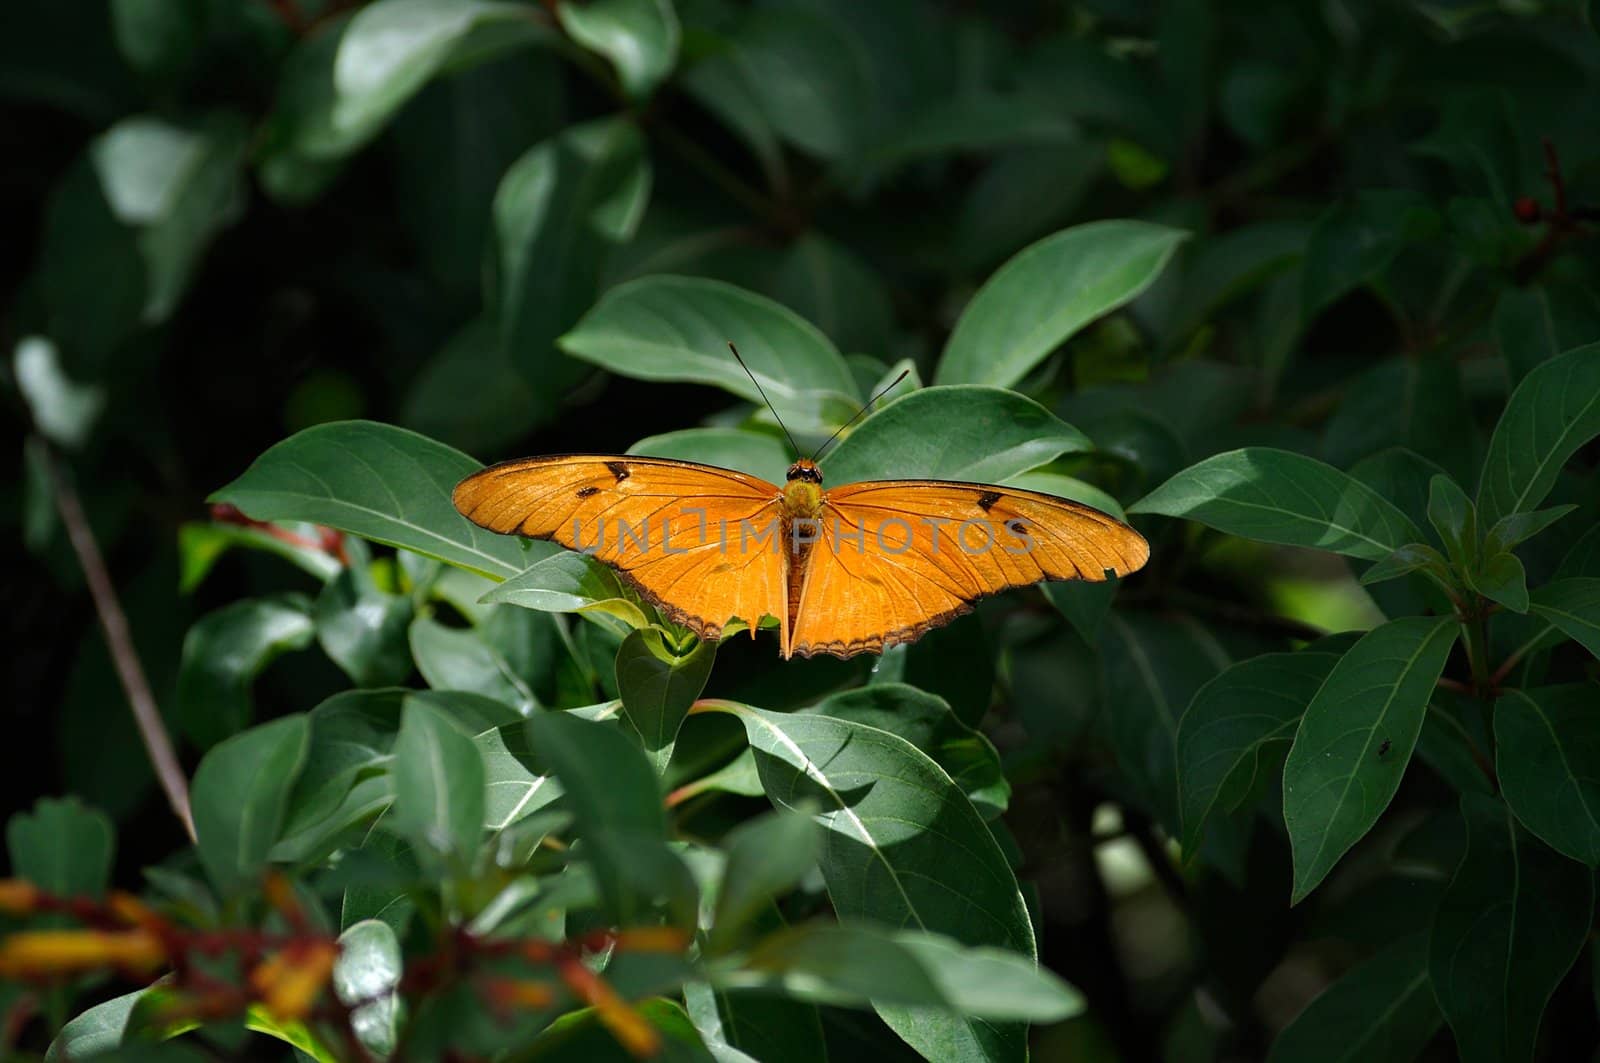 Dryas Iulia, commonly called Julia Butterfly, lands on sunlit leaves.